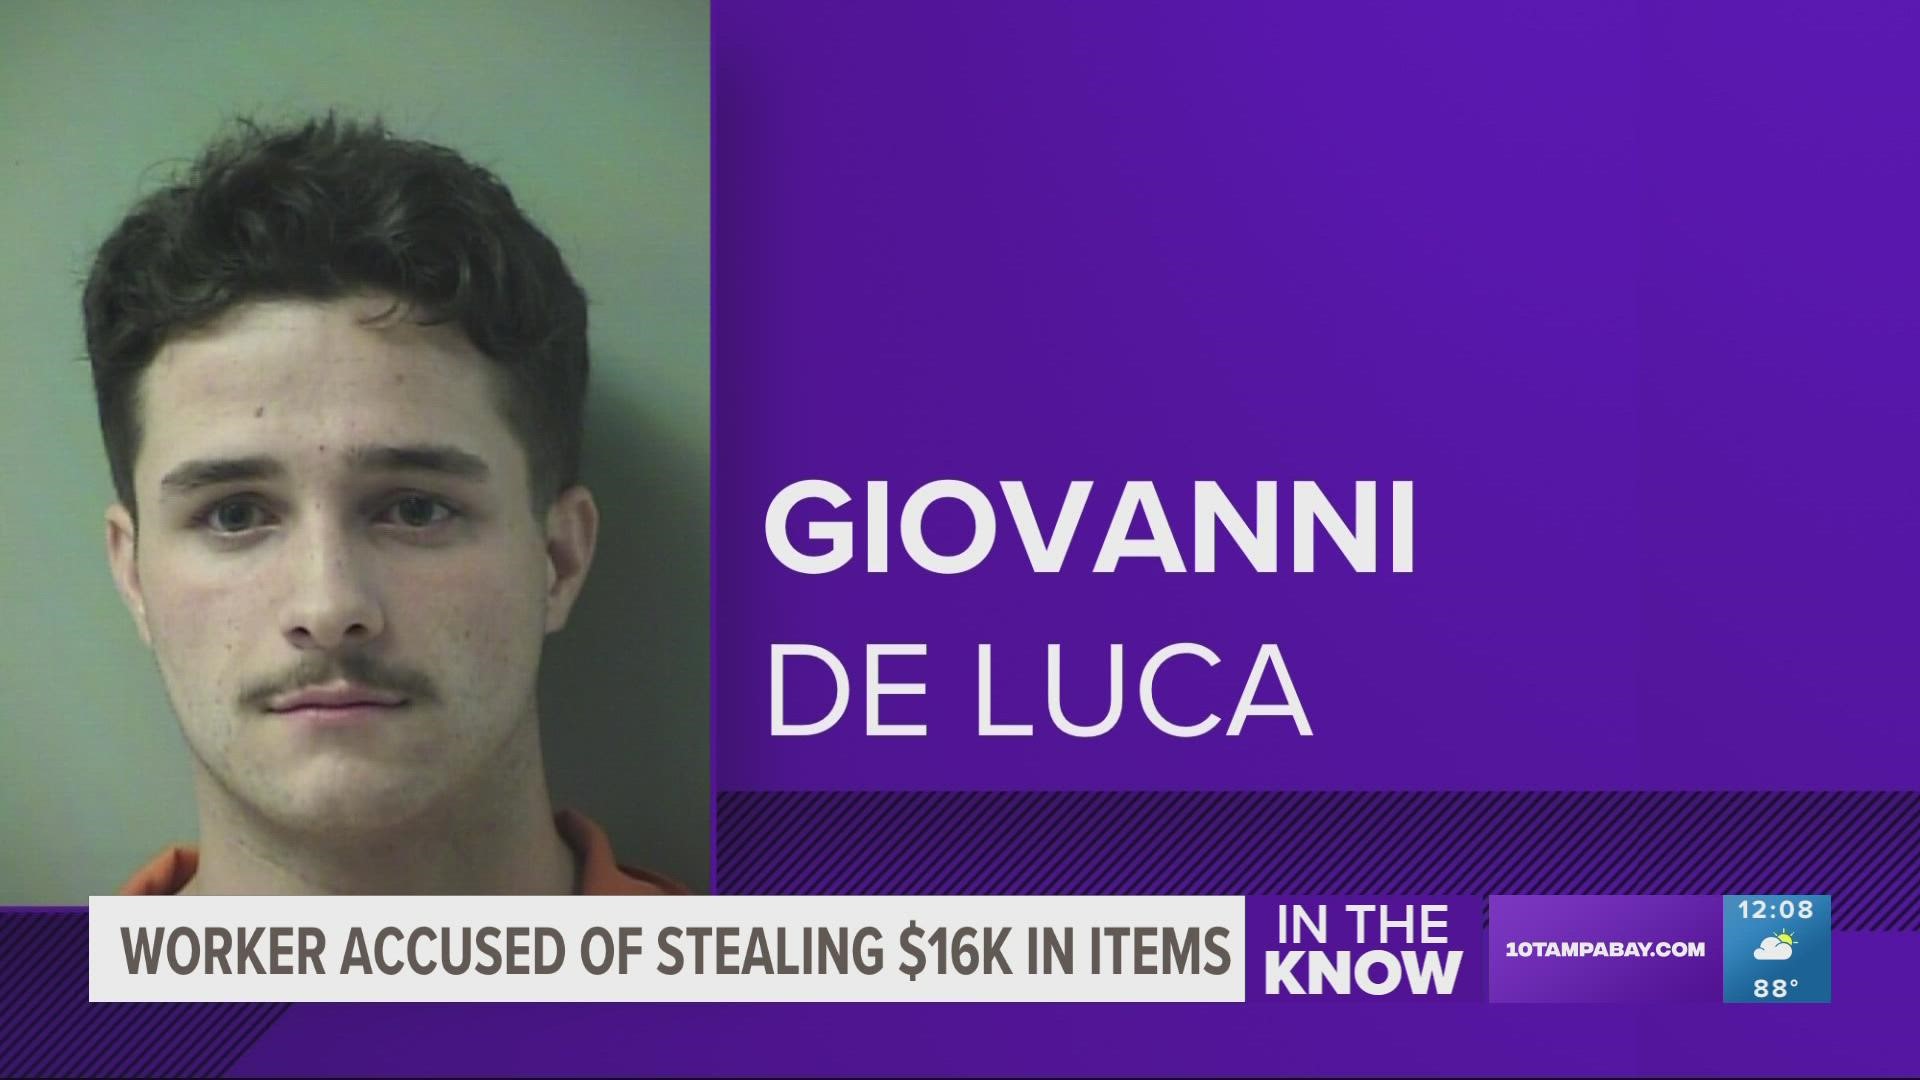 Giovanni De Luca, 19, admitted to taking some items, the sheriff's office said.